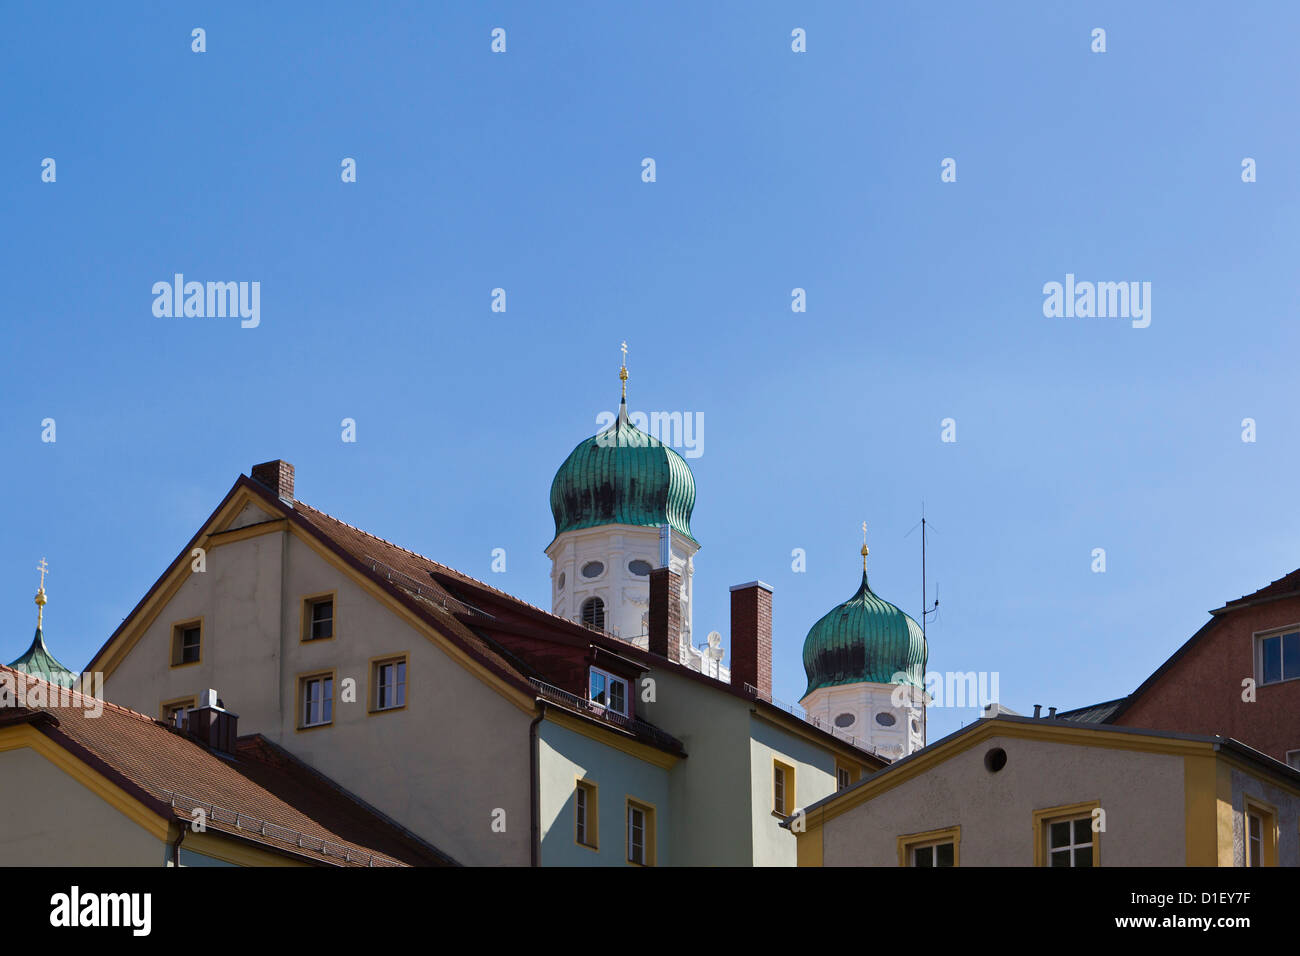 Steeples of the Dome of Passau, Bavaria, Germany Stock Photo